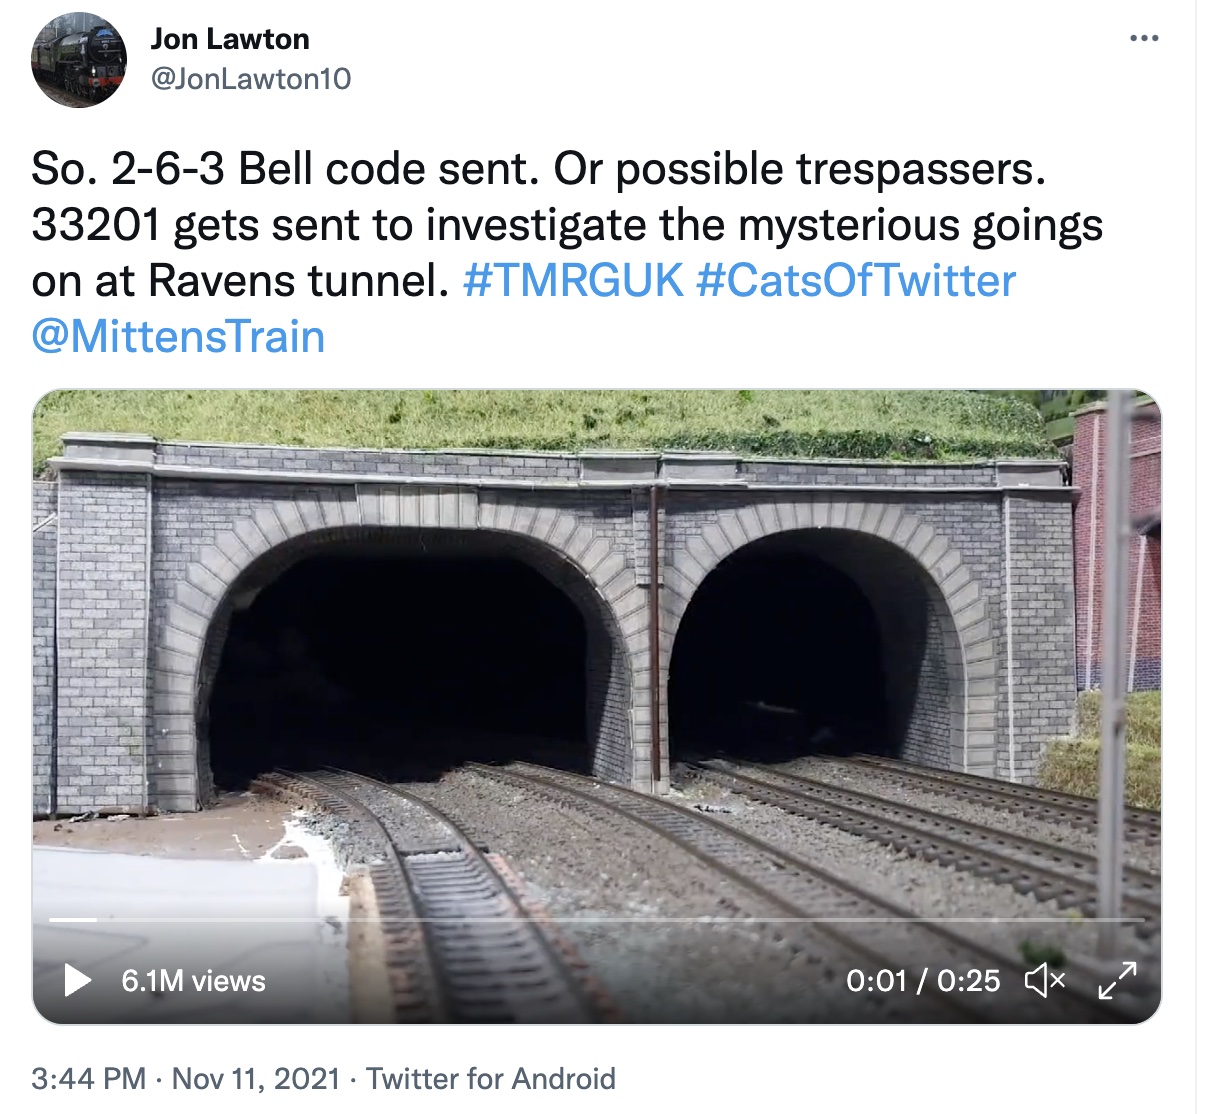 Screen shot of a tweet by Jon Lawson, showing a video still of a train tunnel with two openings.